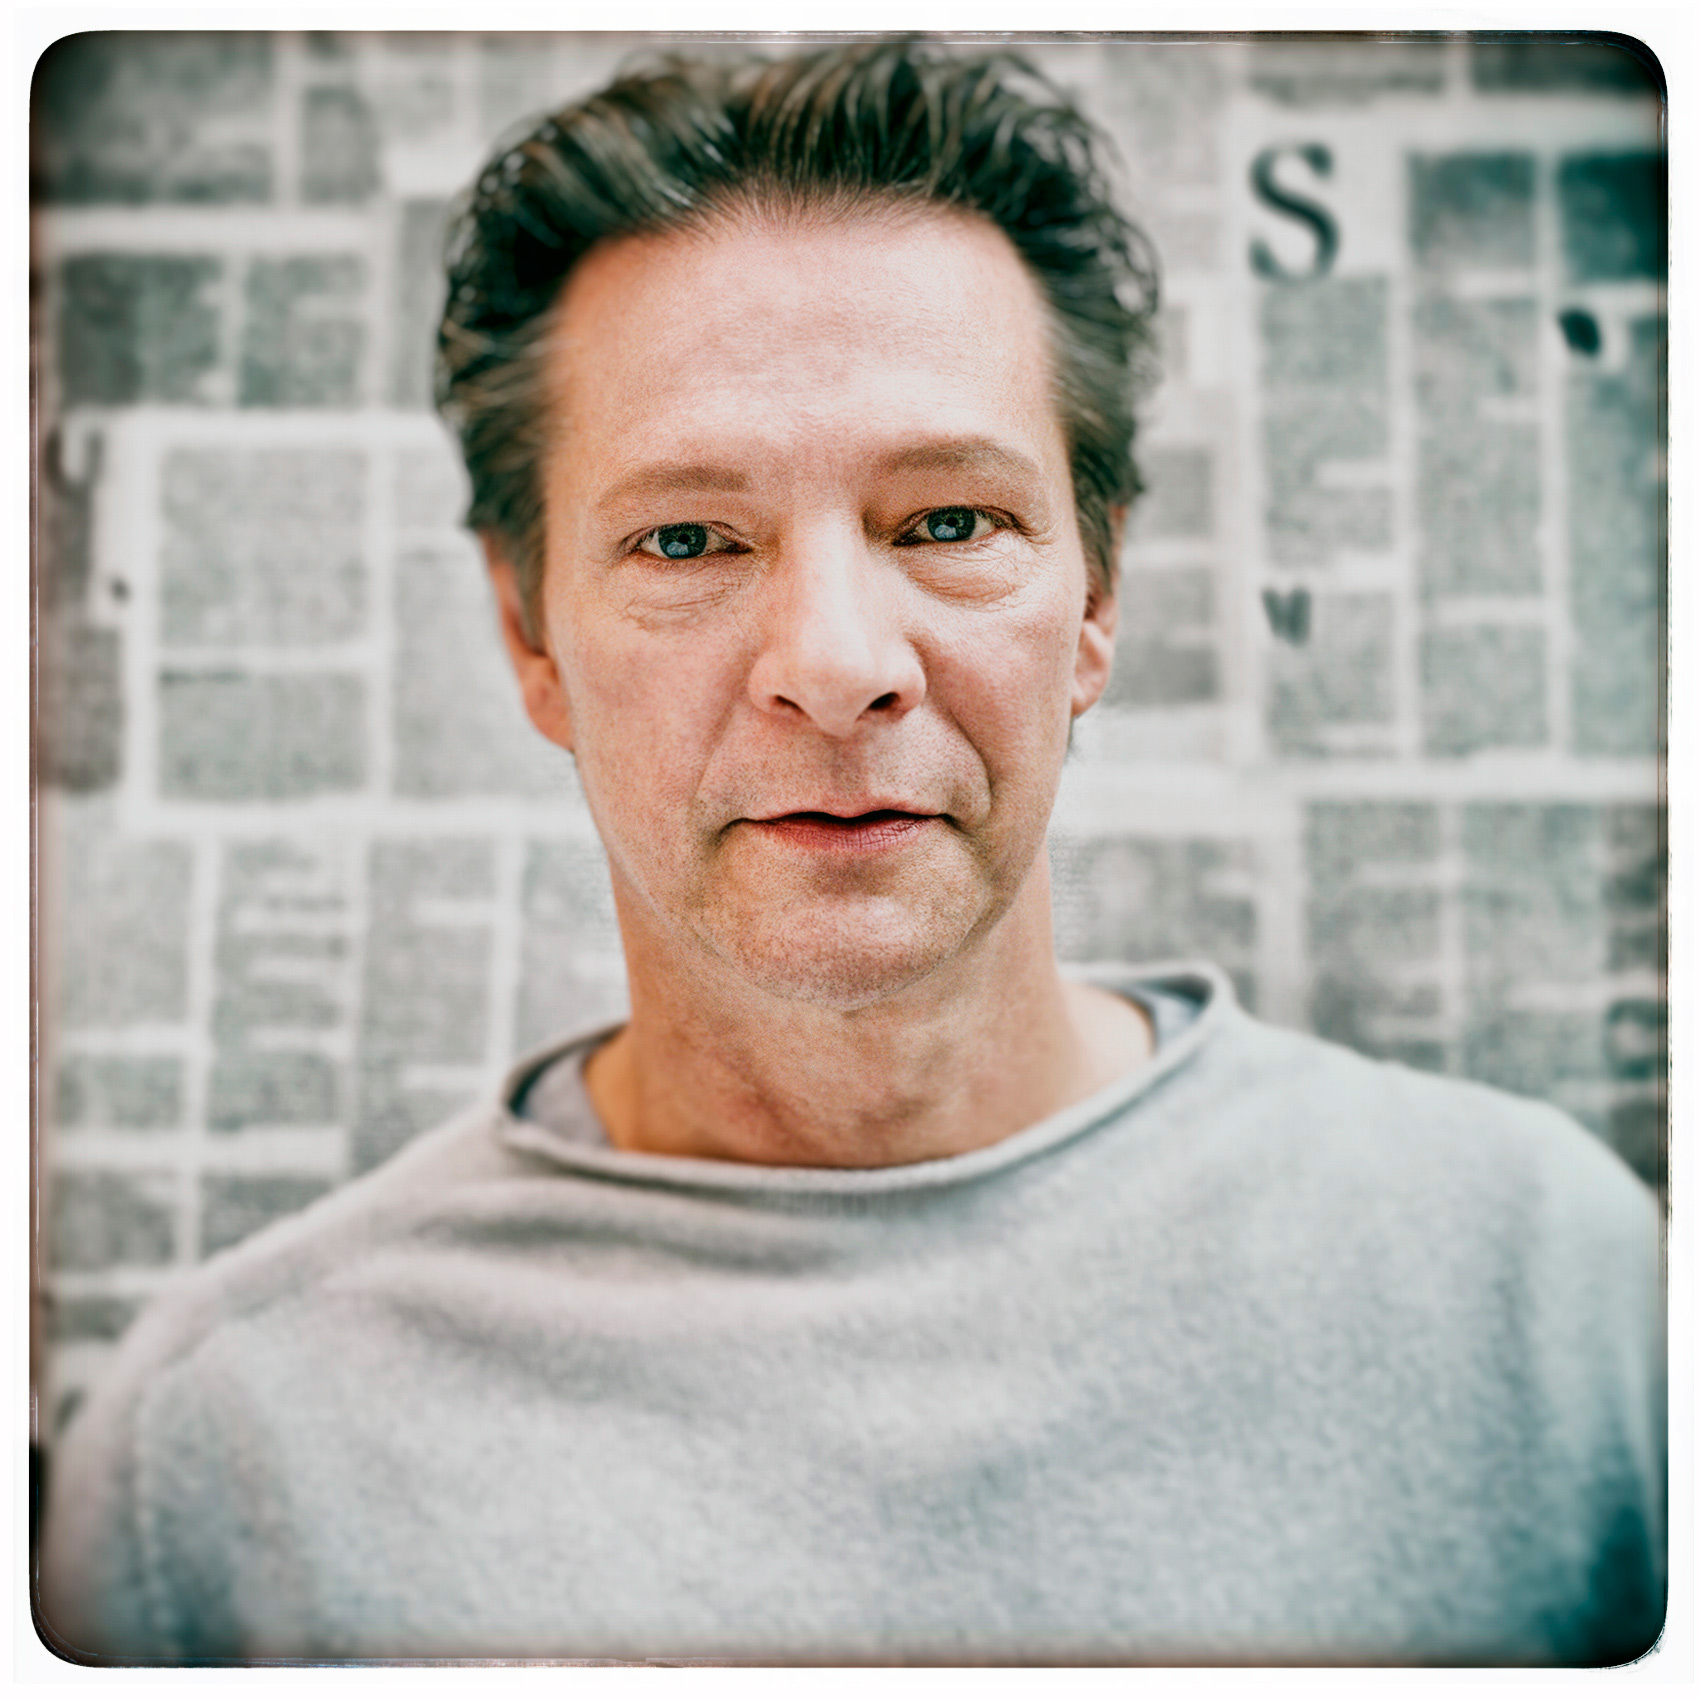 actor chris cooper poses for a serious photo at the toronto international film festival